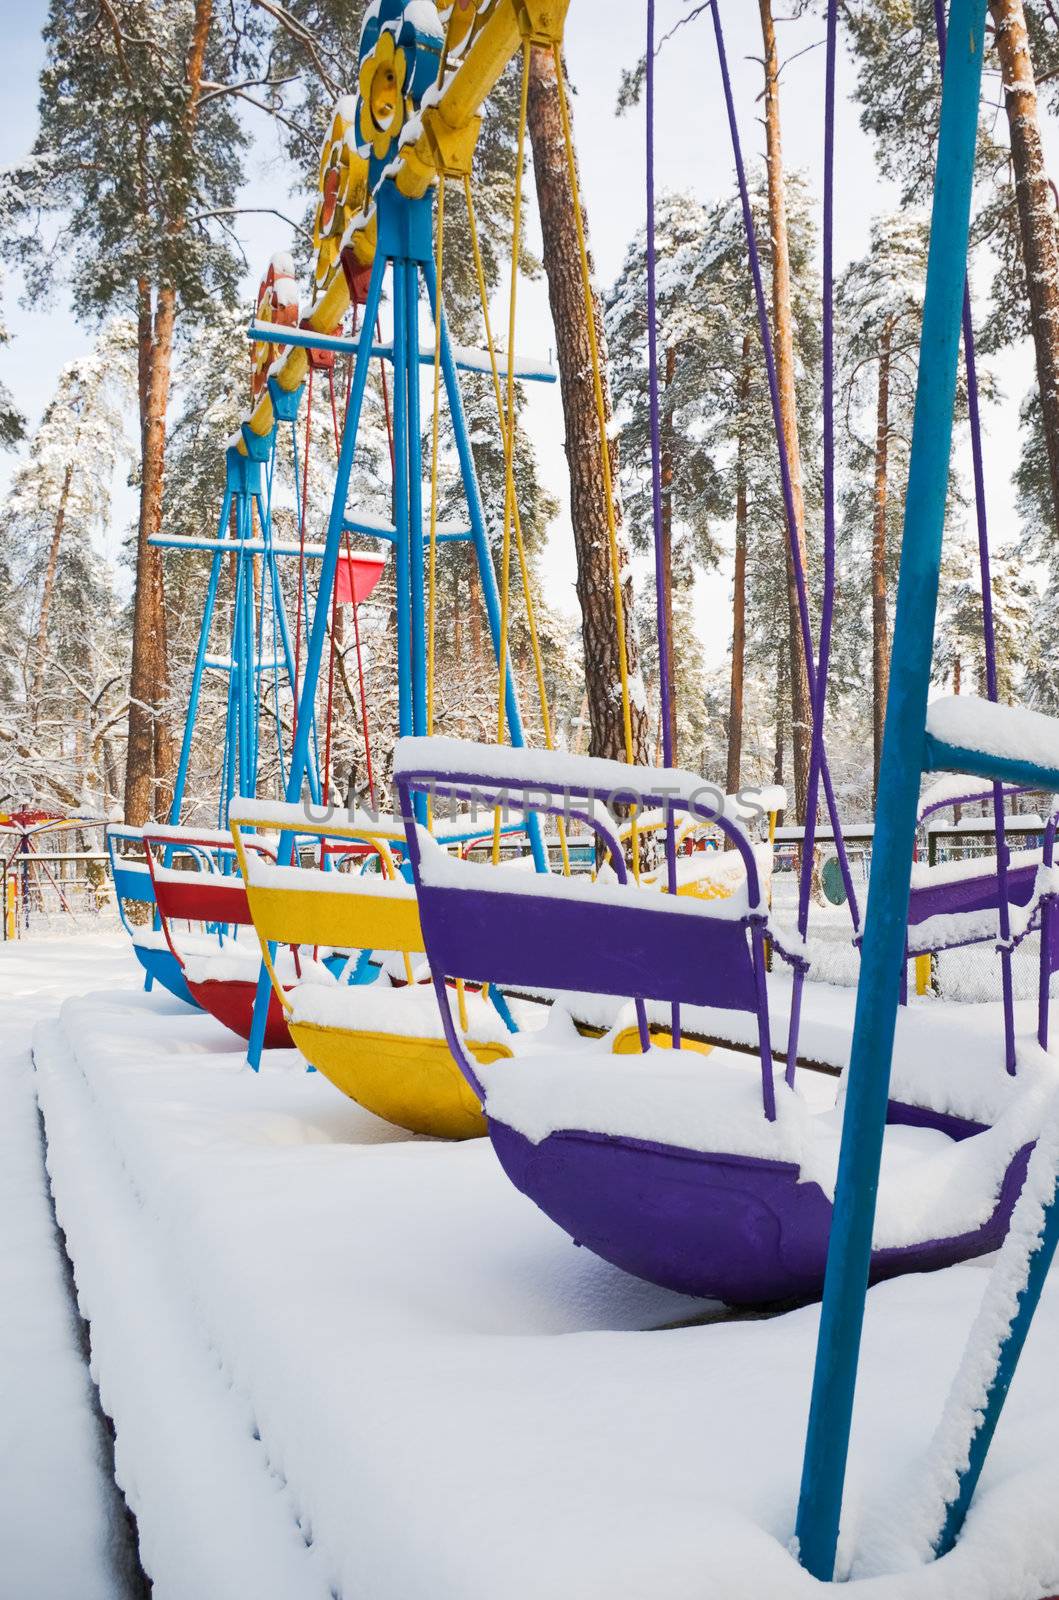 Child's swings in an empty park playground covered in snow.